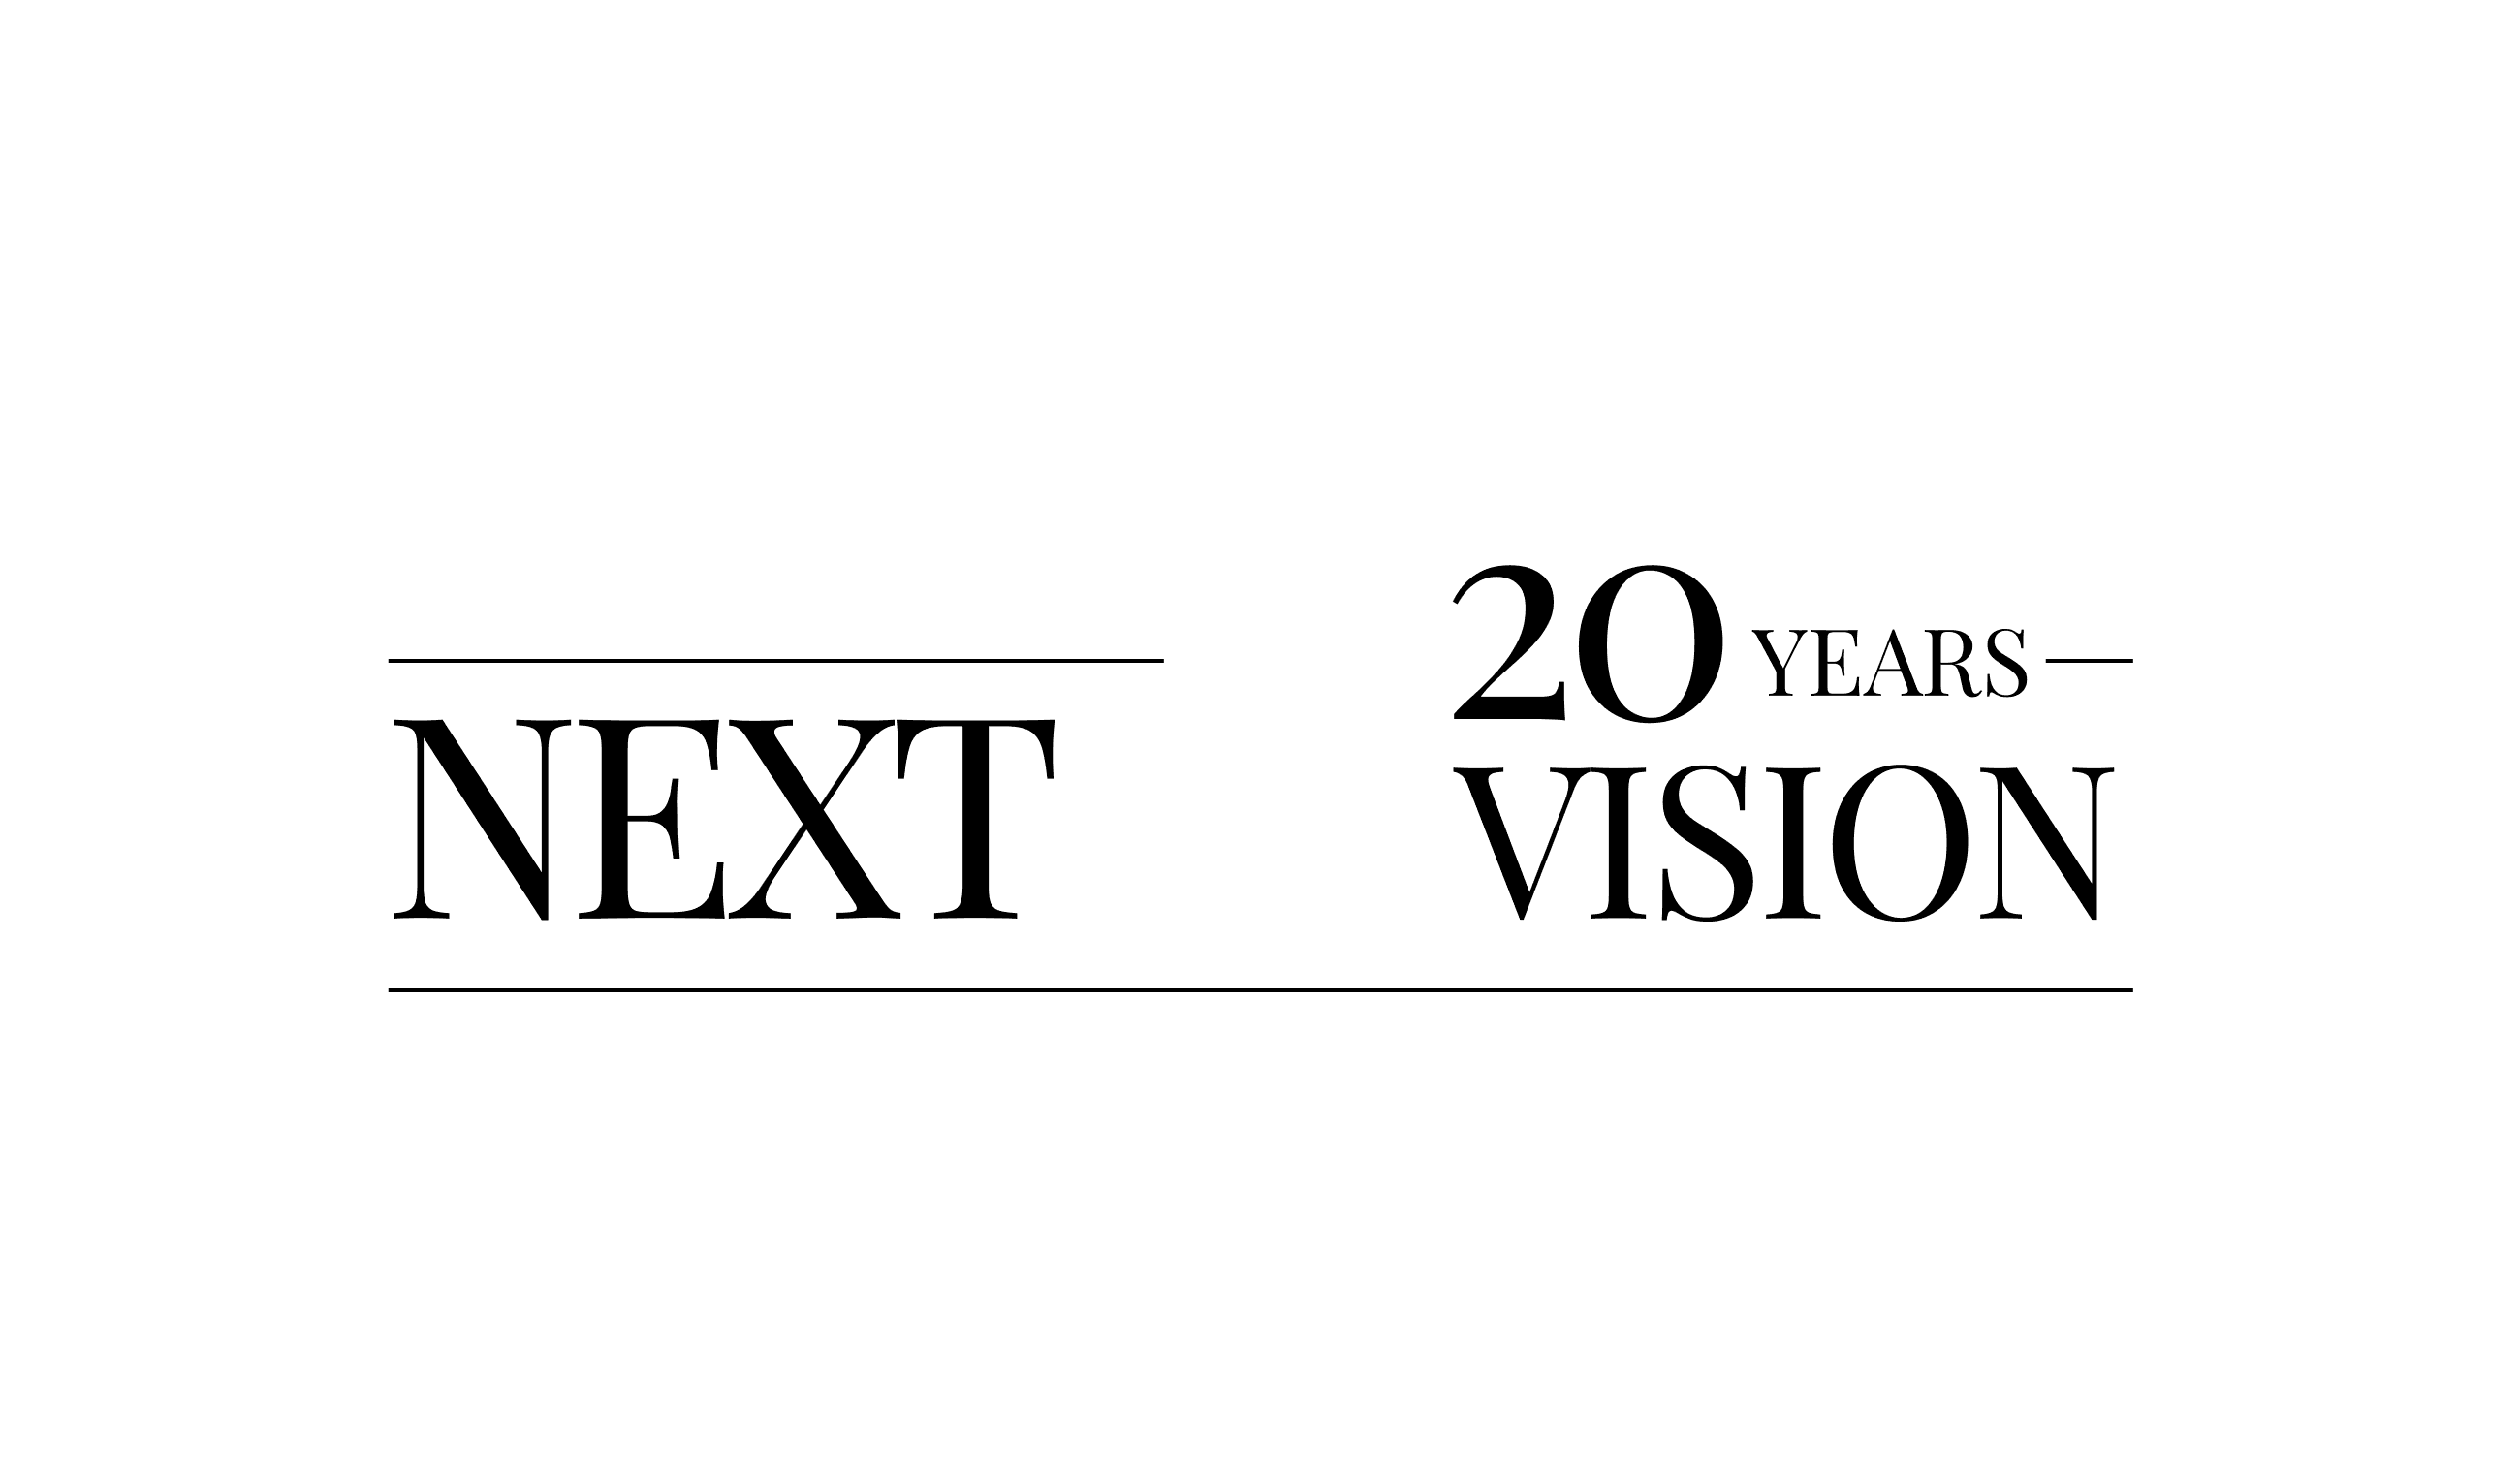 NEXT 20YEARS VISION